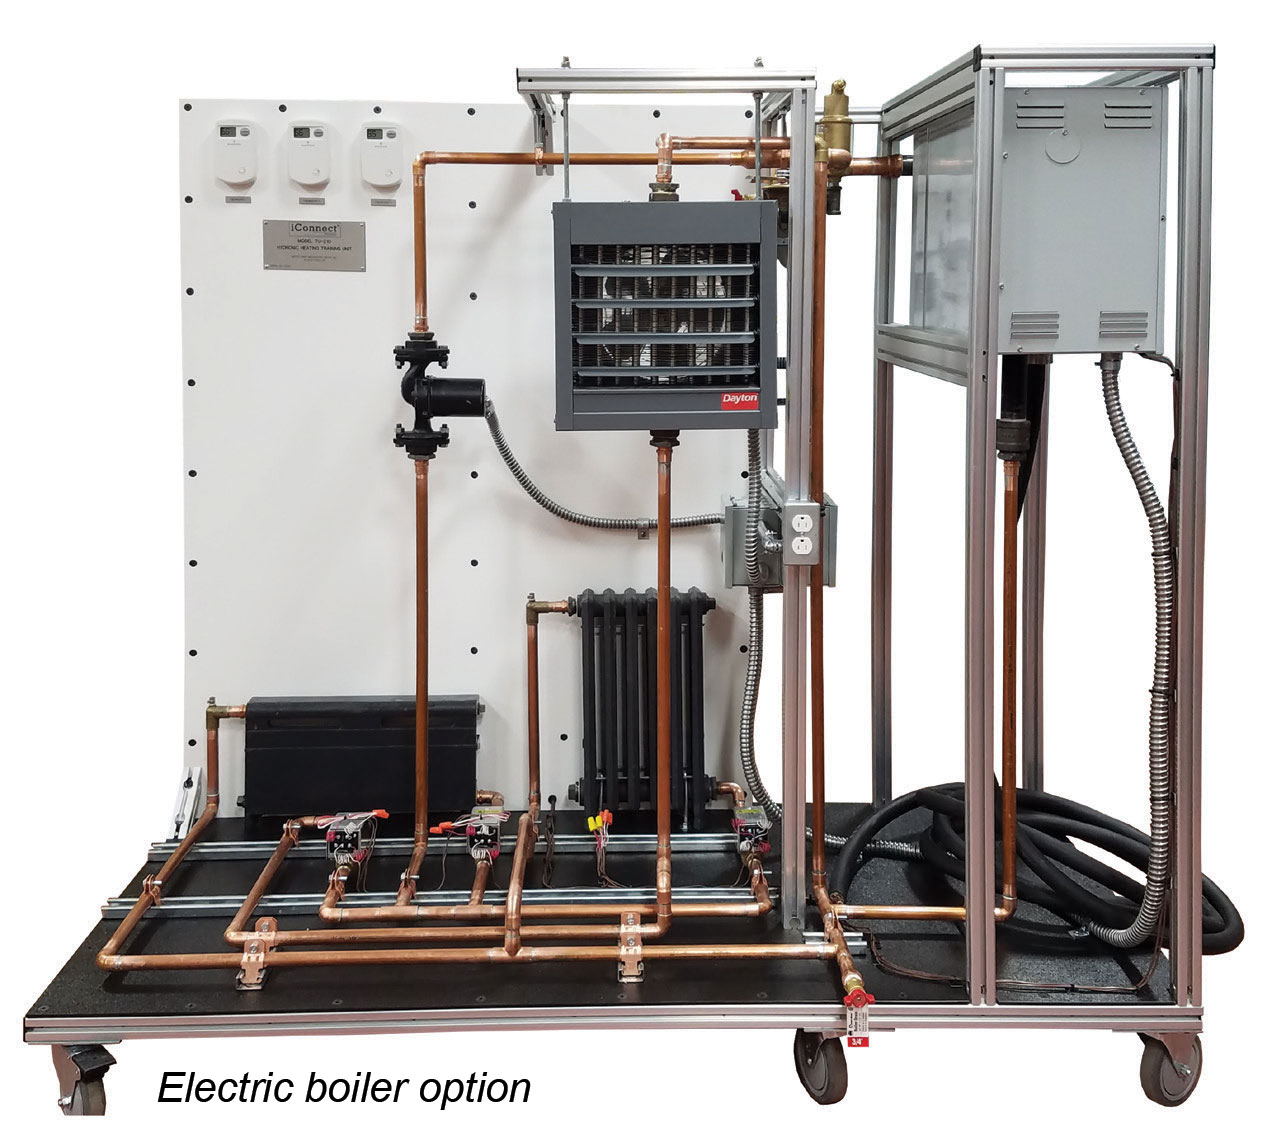 TU-210 Hydronic Heating Training Unit with electric boiler option